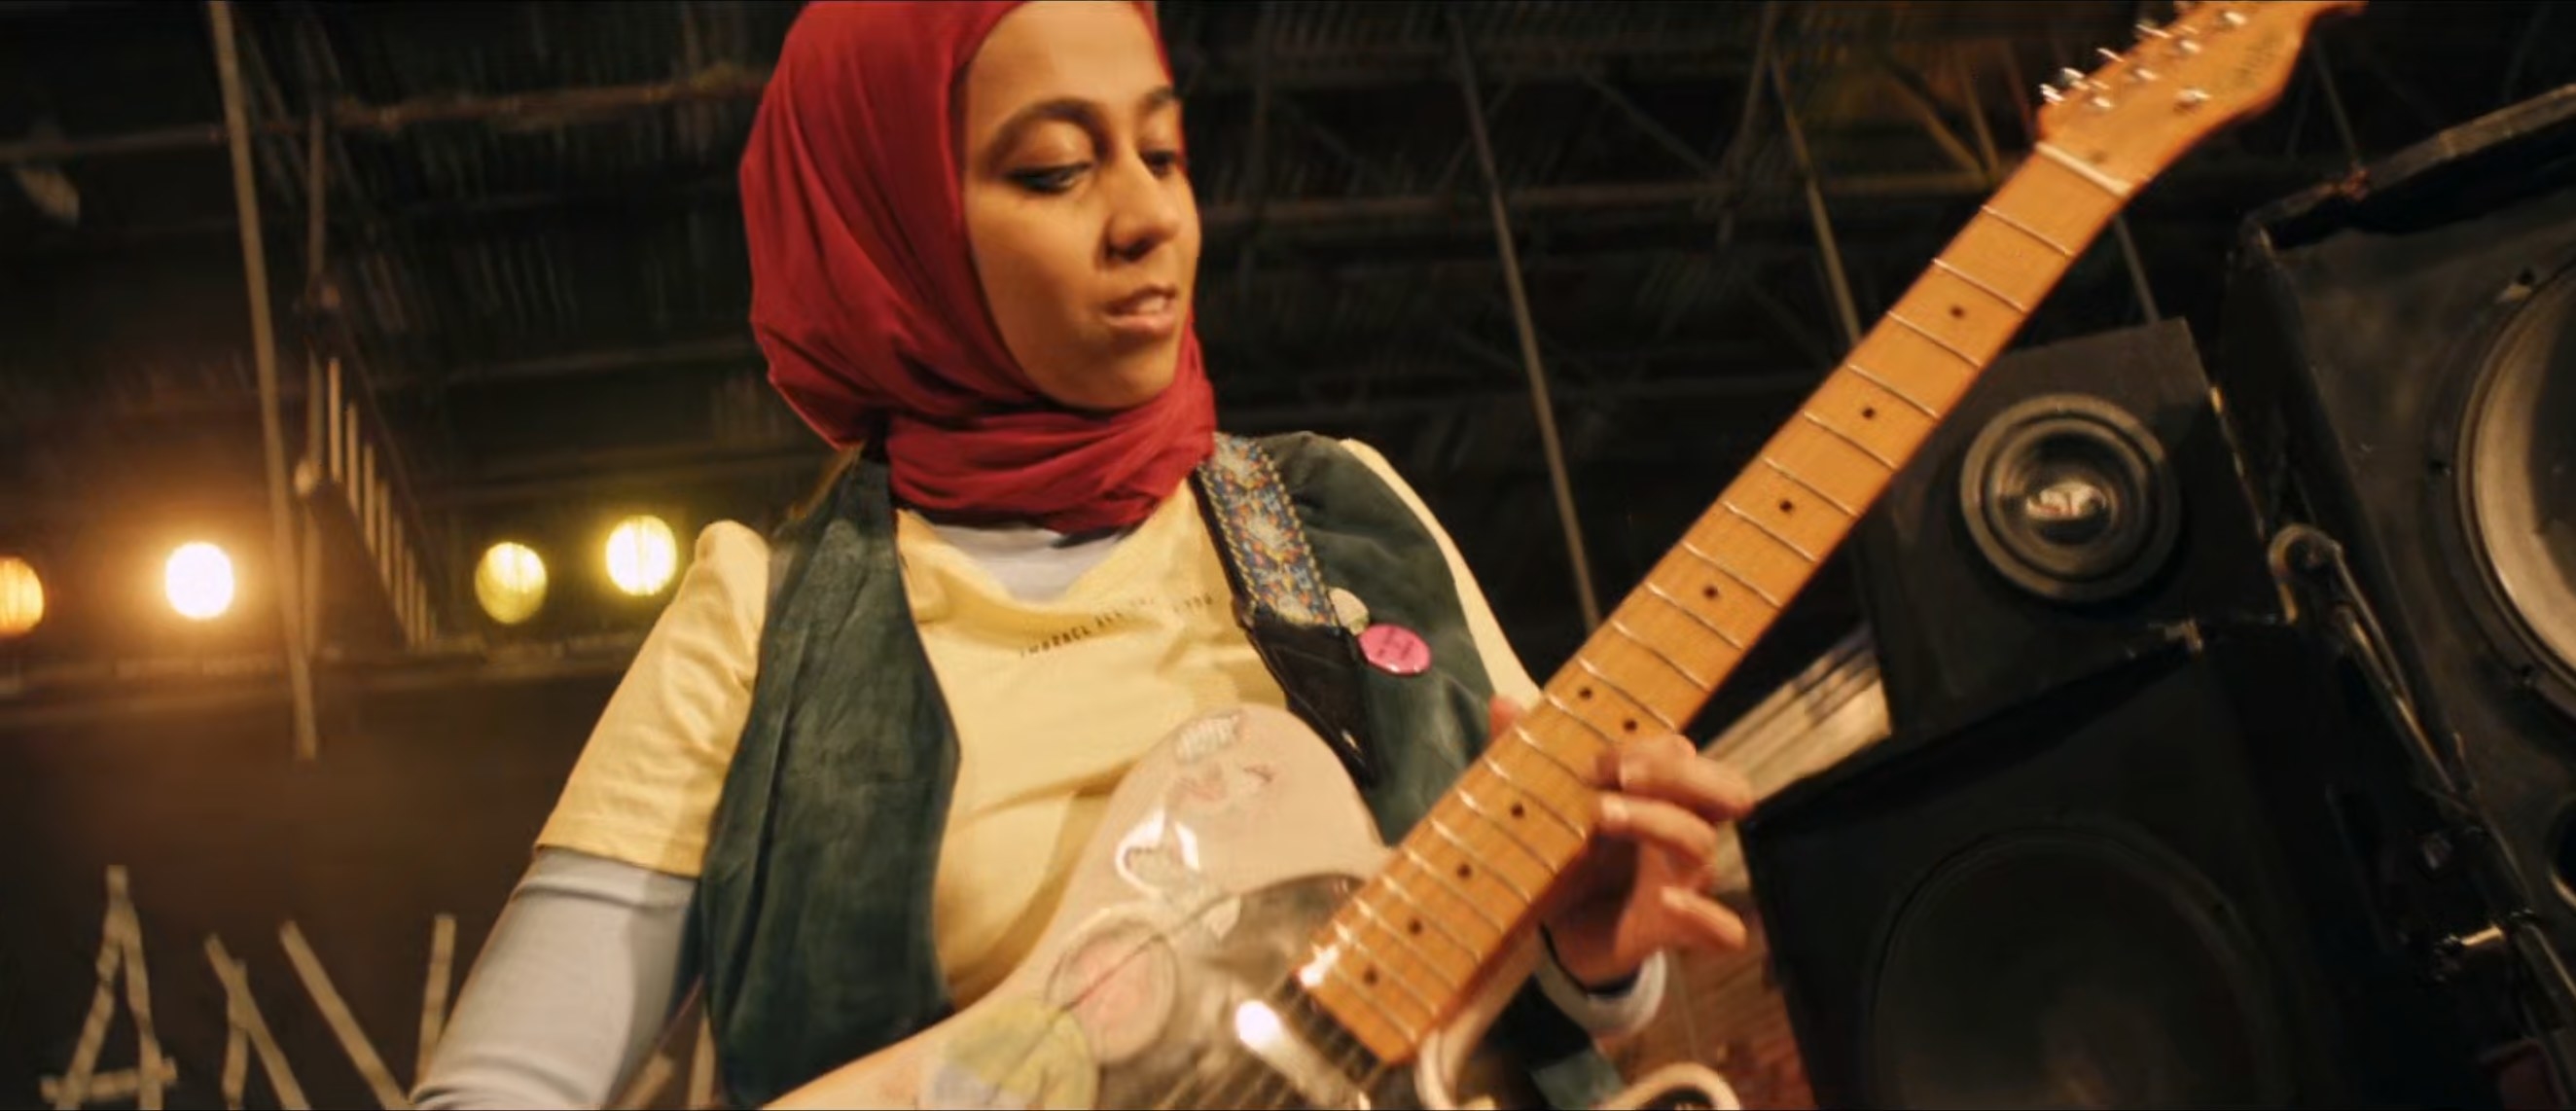 In a screenshot from the season 1 finale, Amina, a Muslim woman wearing a red hijab, looks content on stage playing electric guitar with her band, who are not in frame.